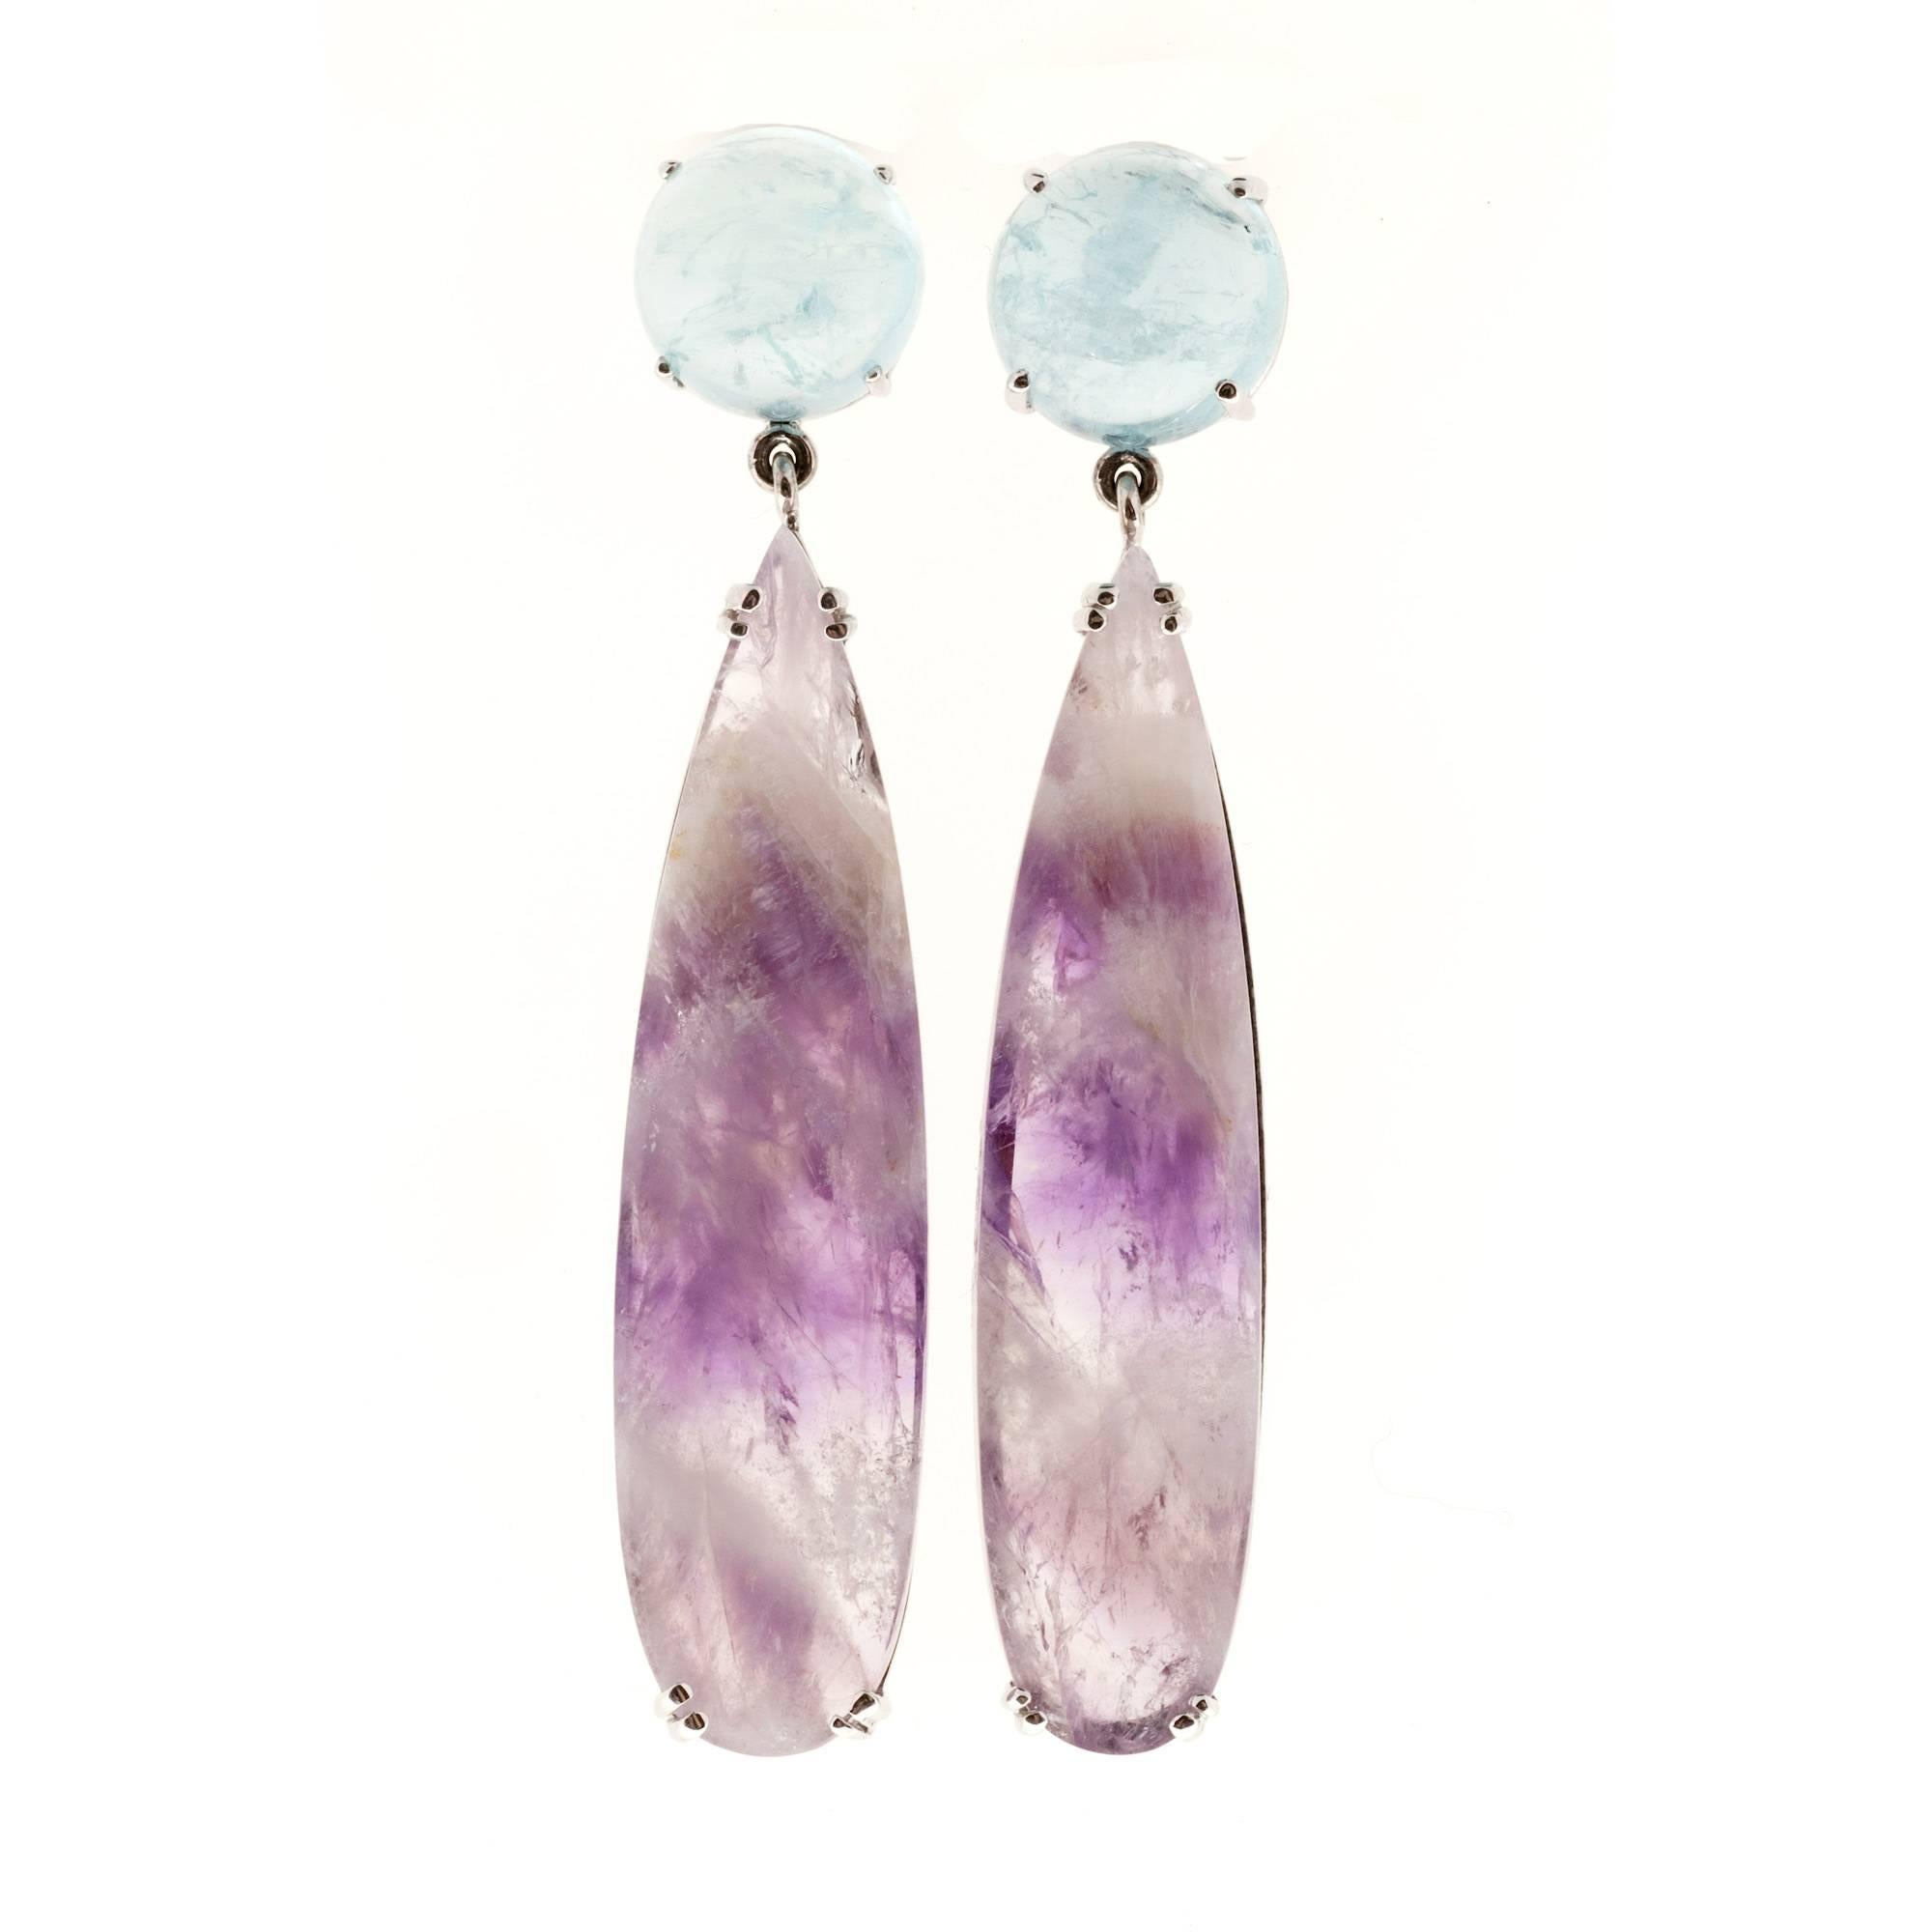 Aqua and Amethyst dangle earrings. Handmade 18k white gold dangle settings from the Peter Suchy Workshop made with natural round Aquamarine and pear shaped Amethyst Quartz.

2 round genuine untreated Aquamarine, 10.7mm, approx. total weight